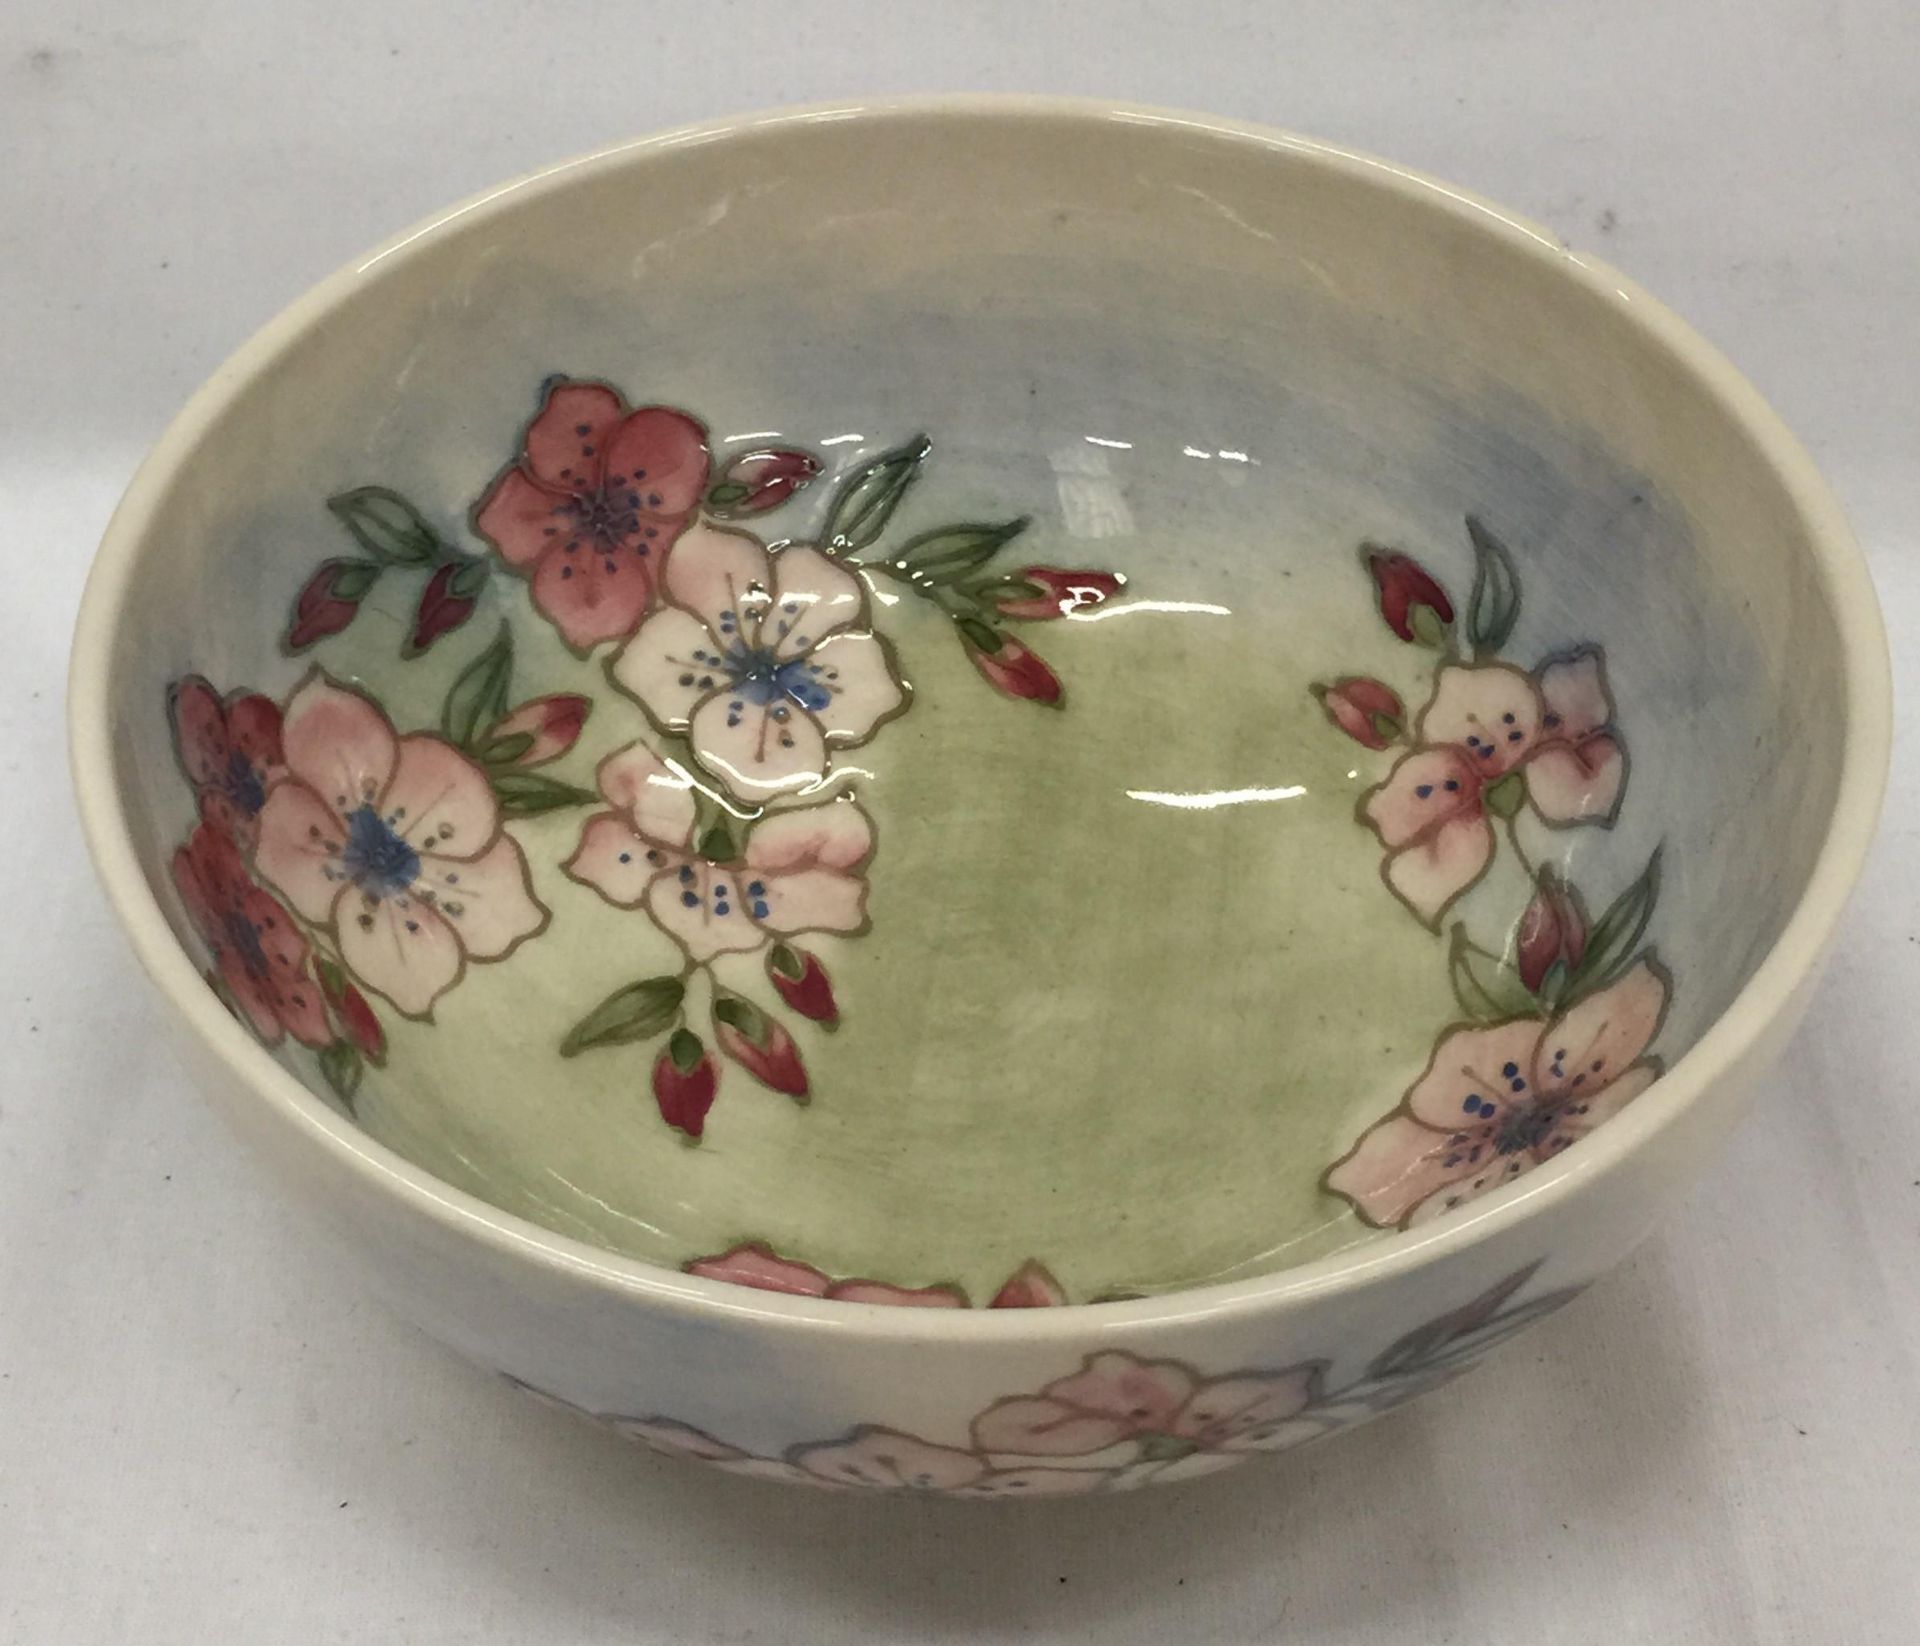 A MOORCROFT 'SPRING BLOSSOM' PATTERN BOWL DESIGNED BY SALLY TUFFIN